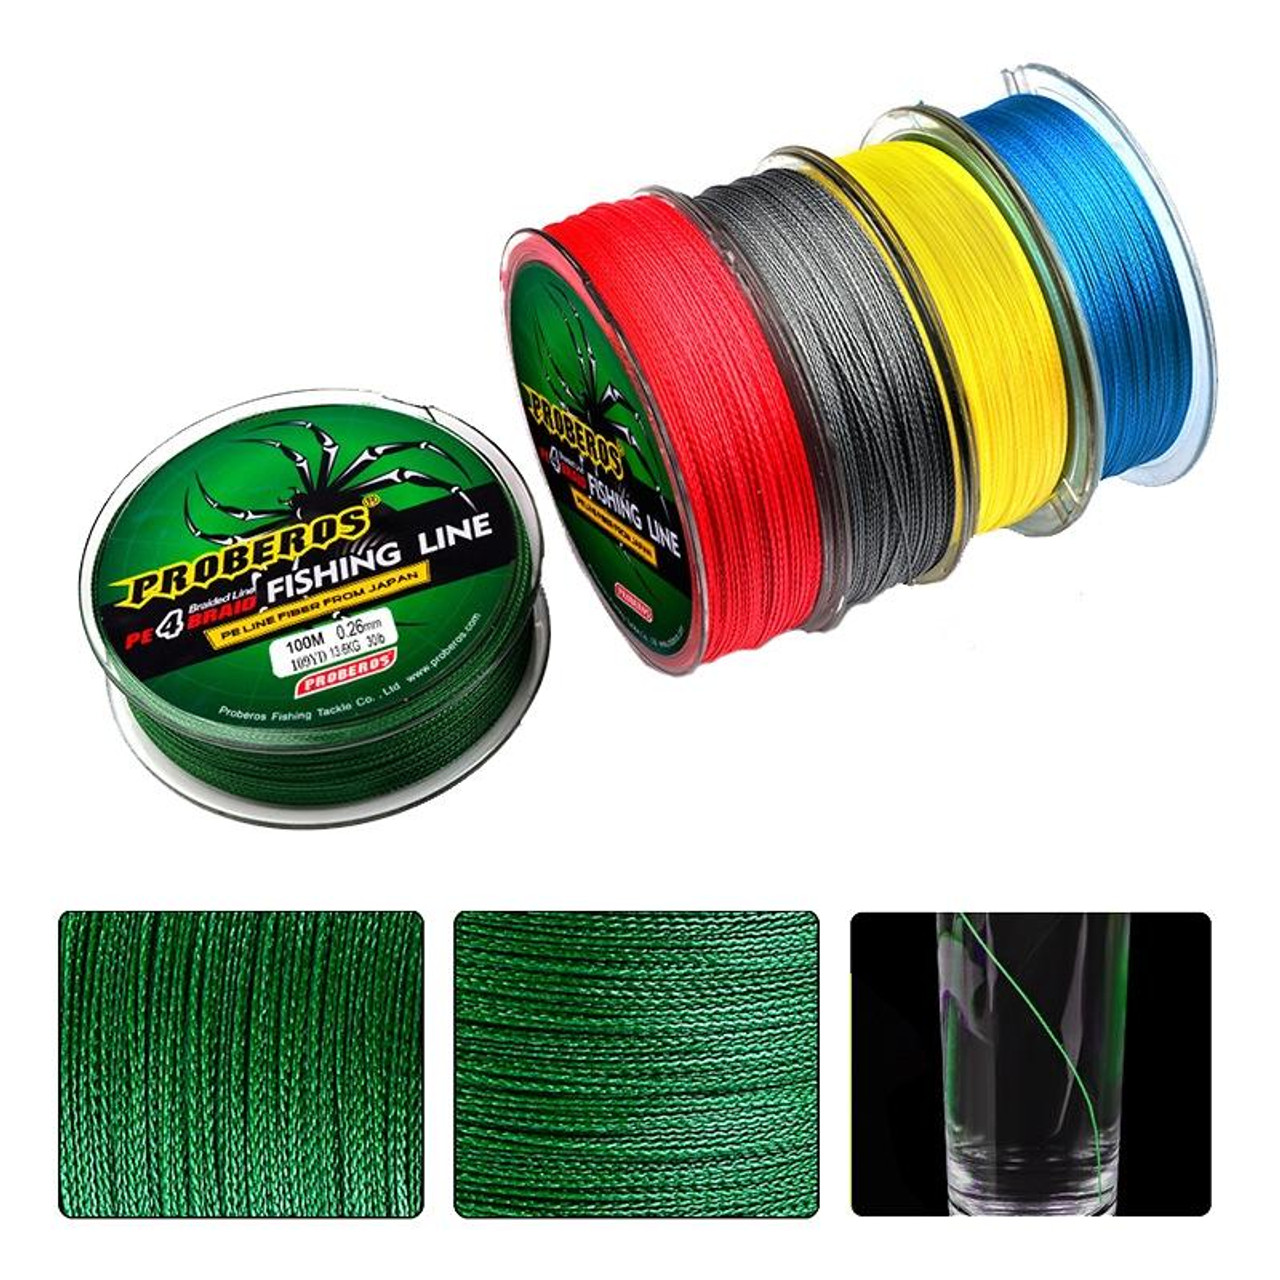 2 PCS PROBEROS 4 Edited 100M Strong Horse Fish Line, Line number